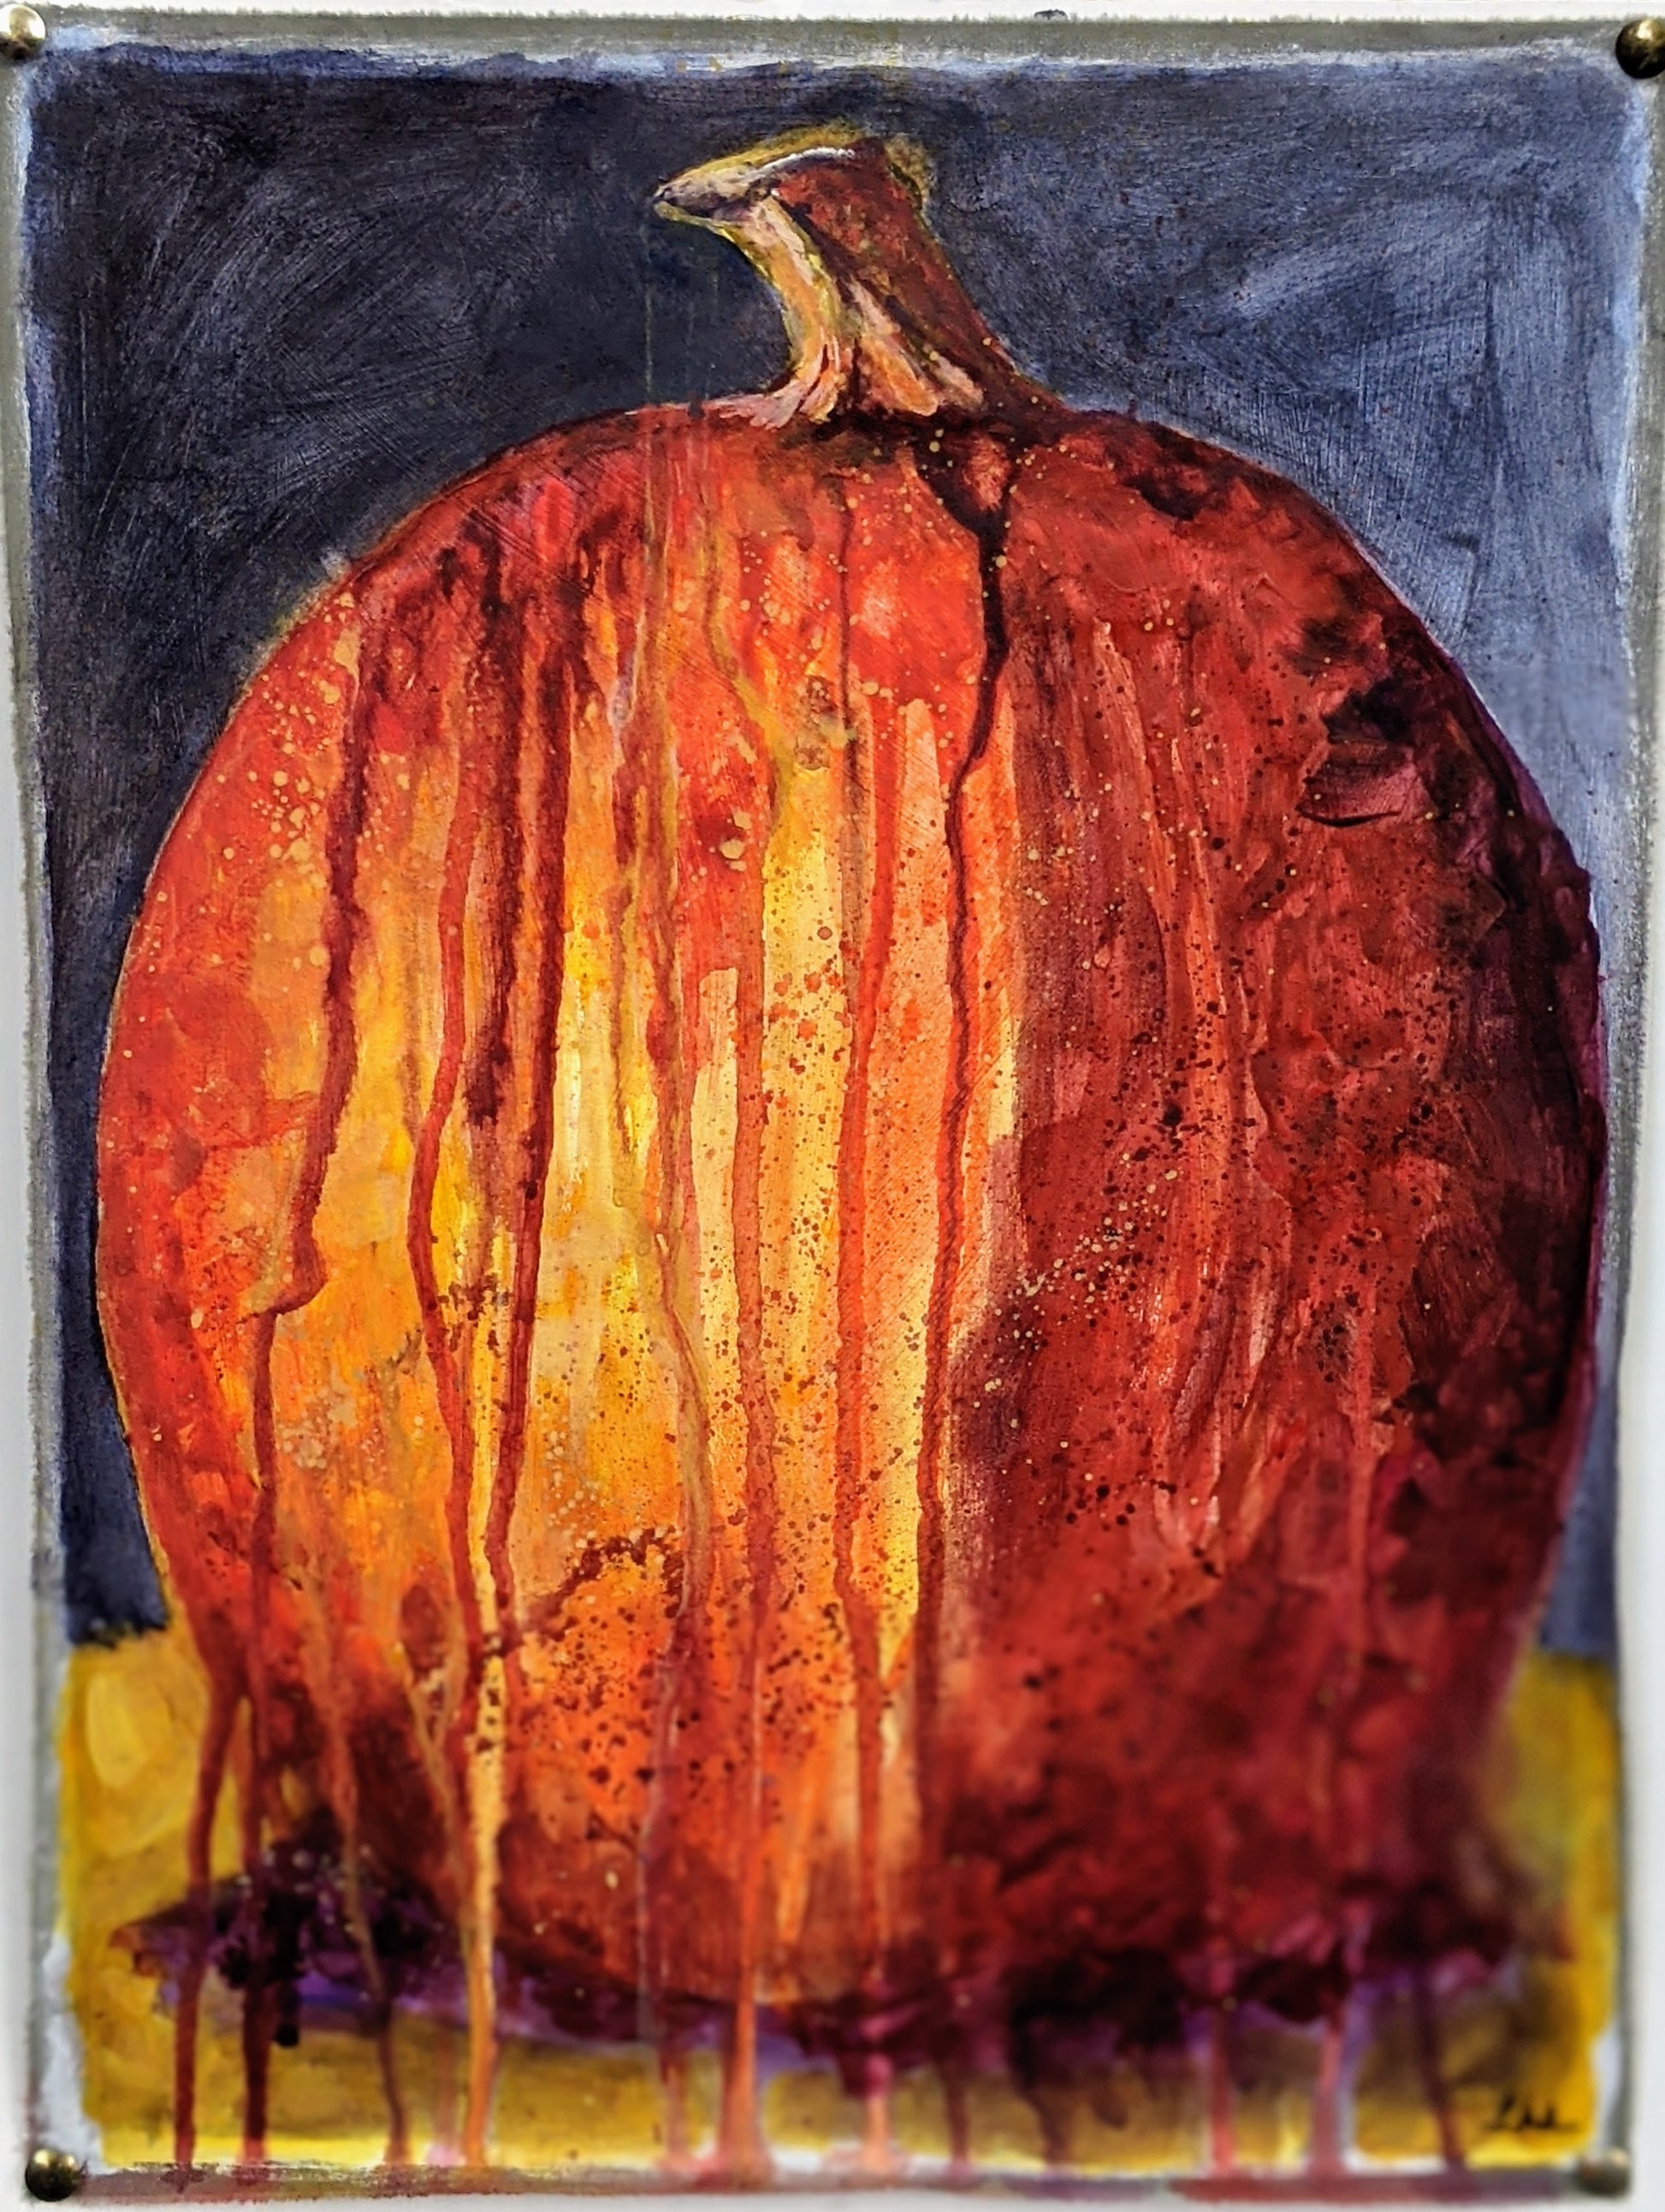 Haunted Pumpkin in the Yard acrylic painting on cloth